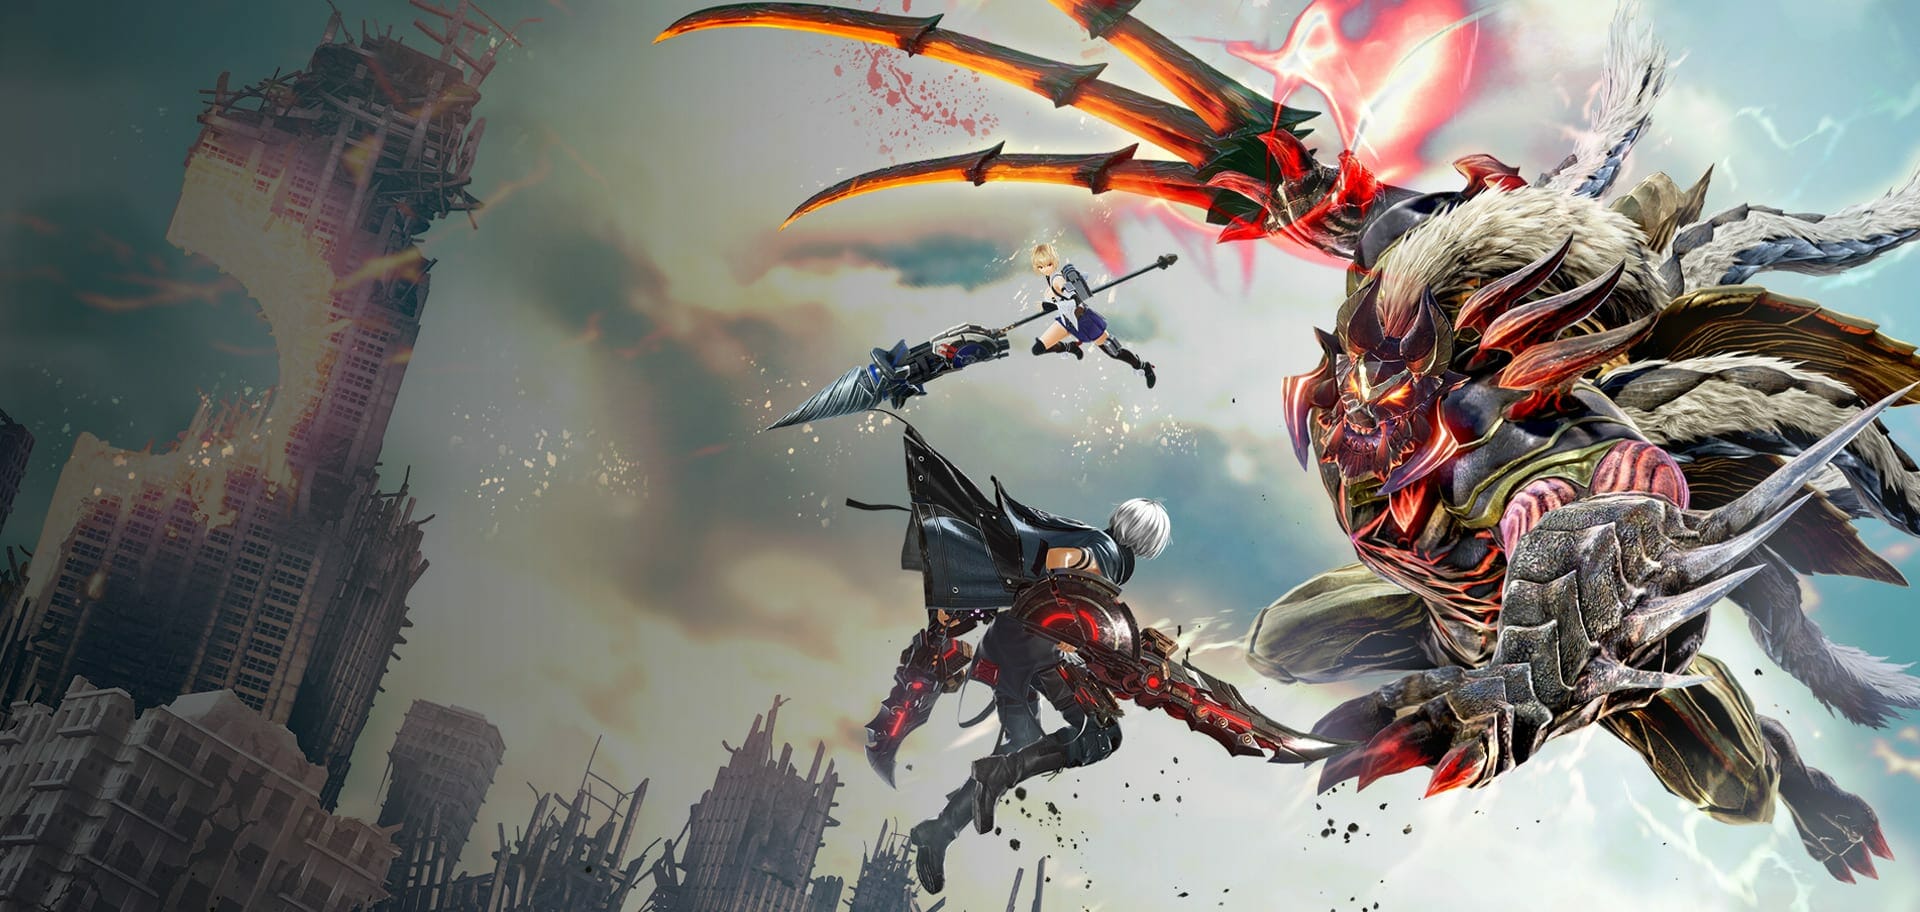 God Eater 3 Switch Demo Release Date